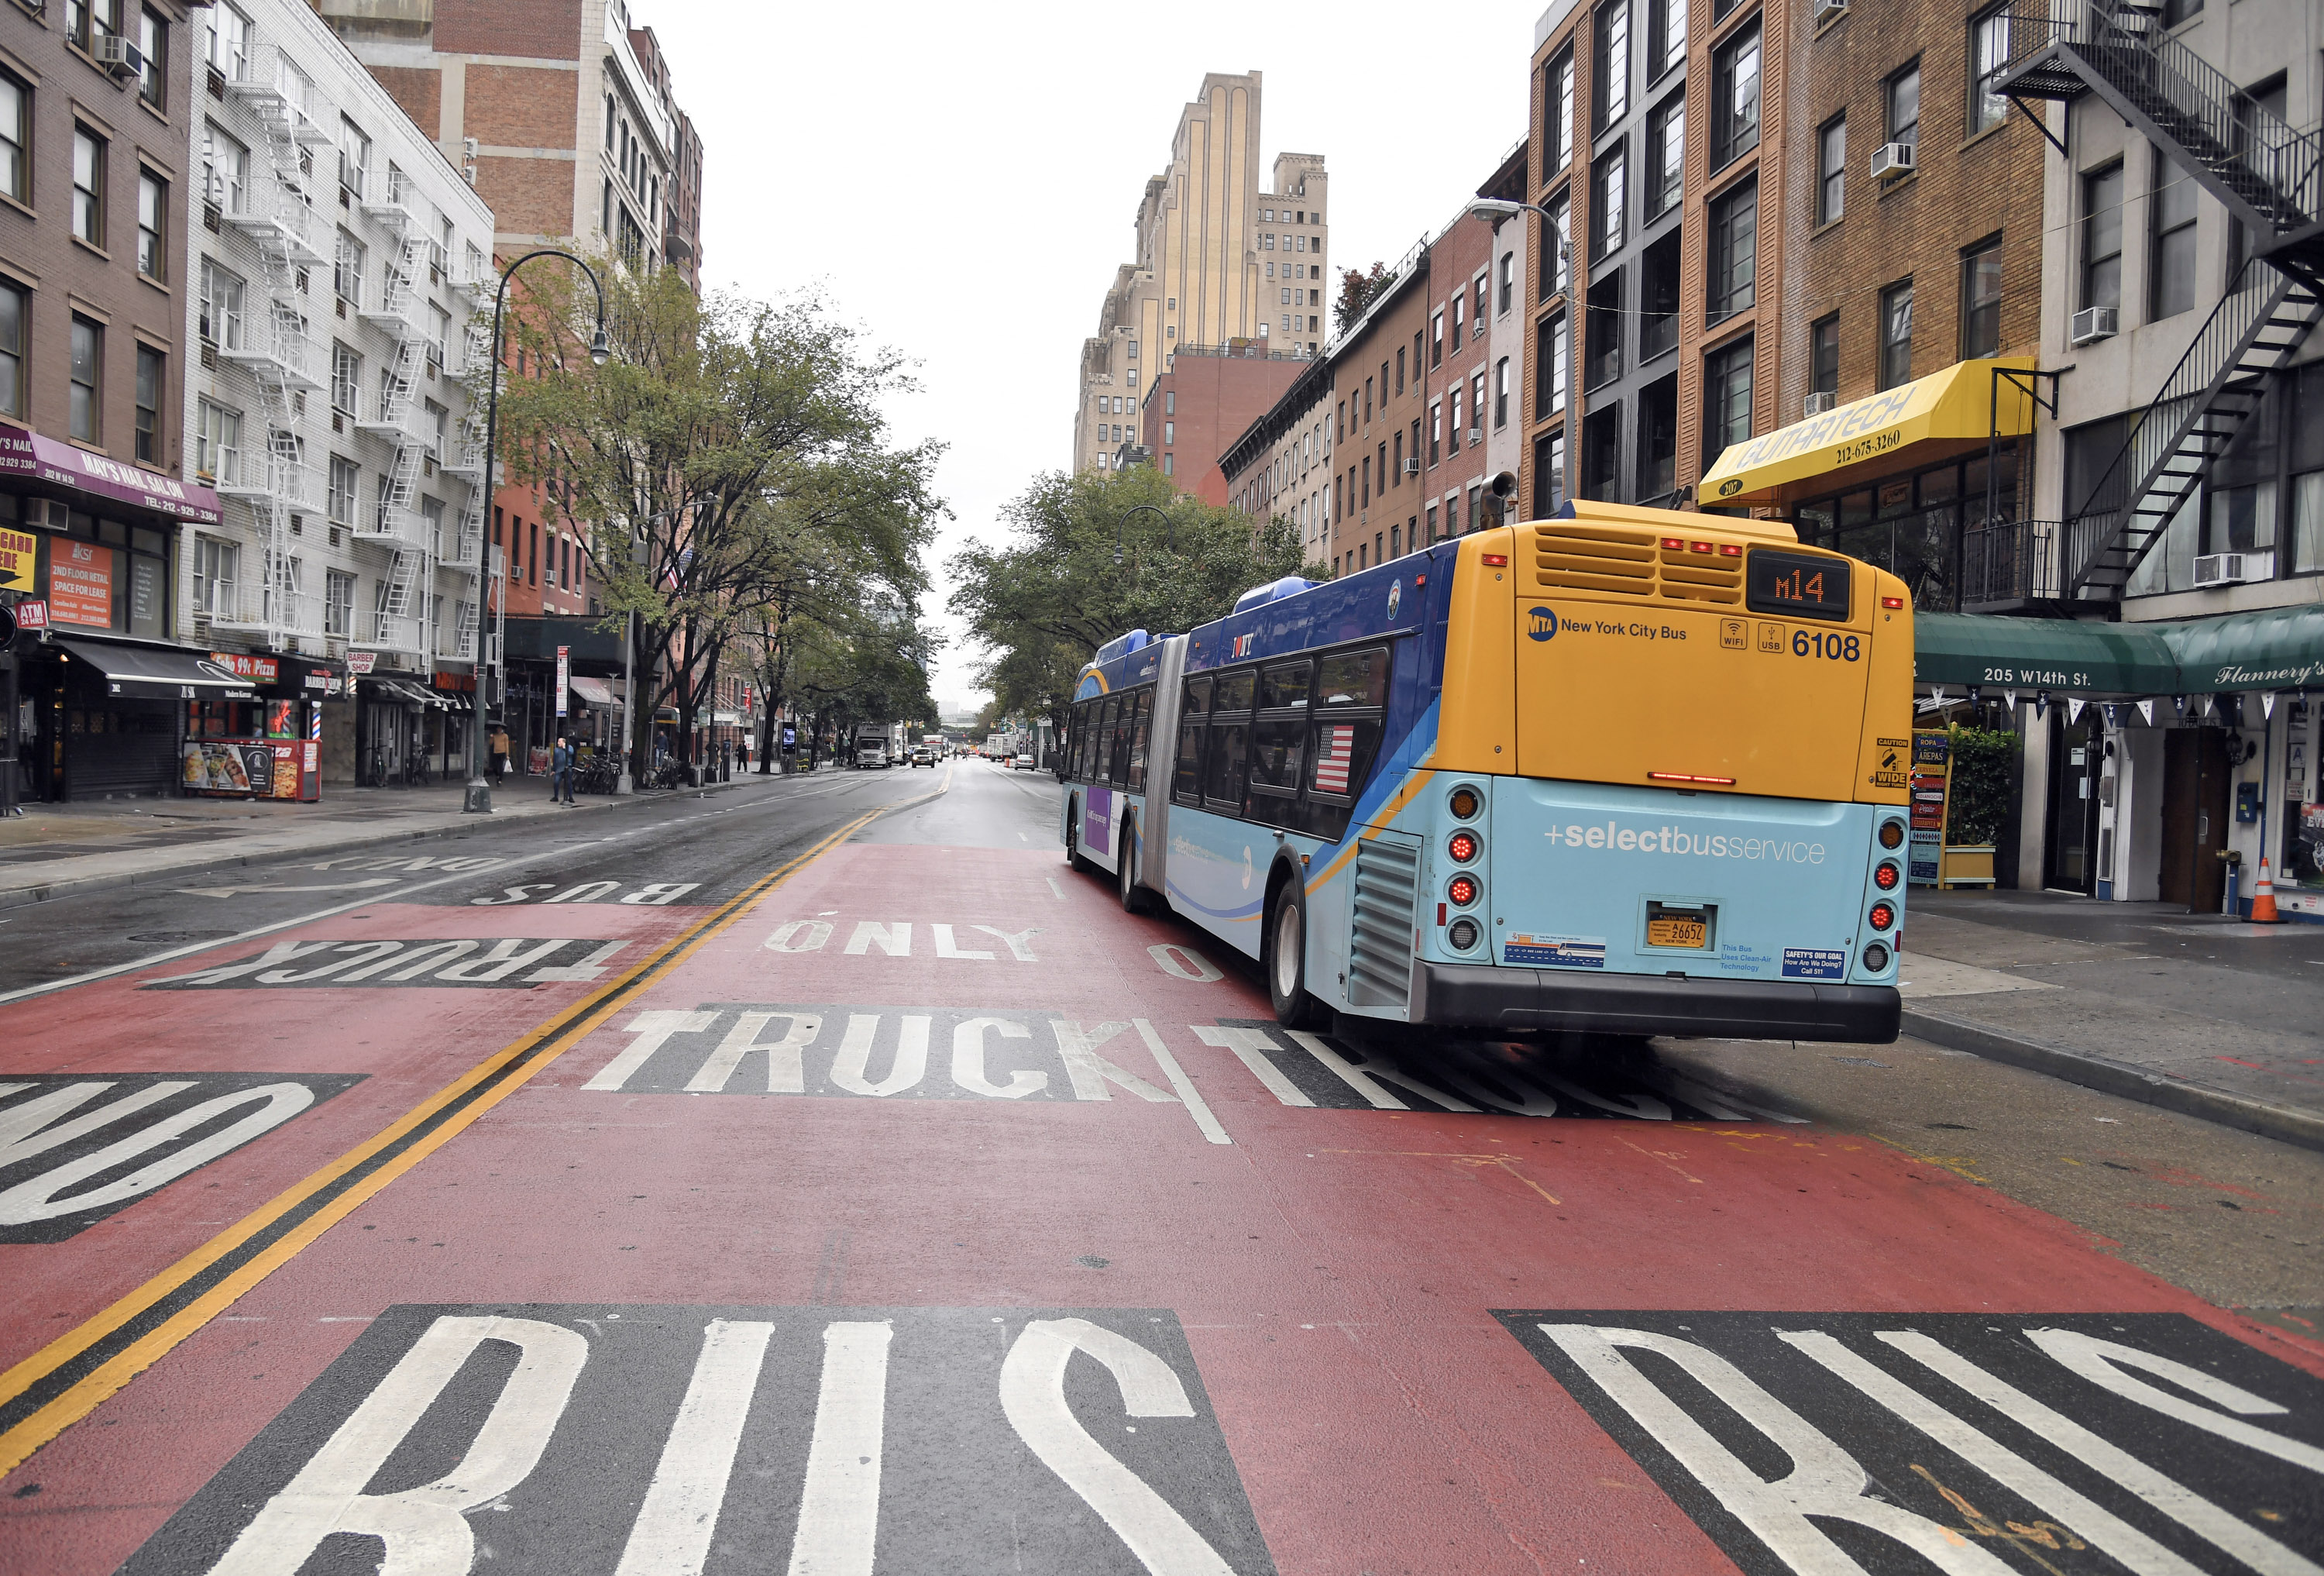 MTA to Install ABLE Cameras on 300 Additional Buses Across Nine Routes by End of 2022